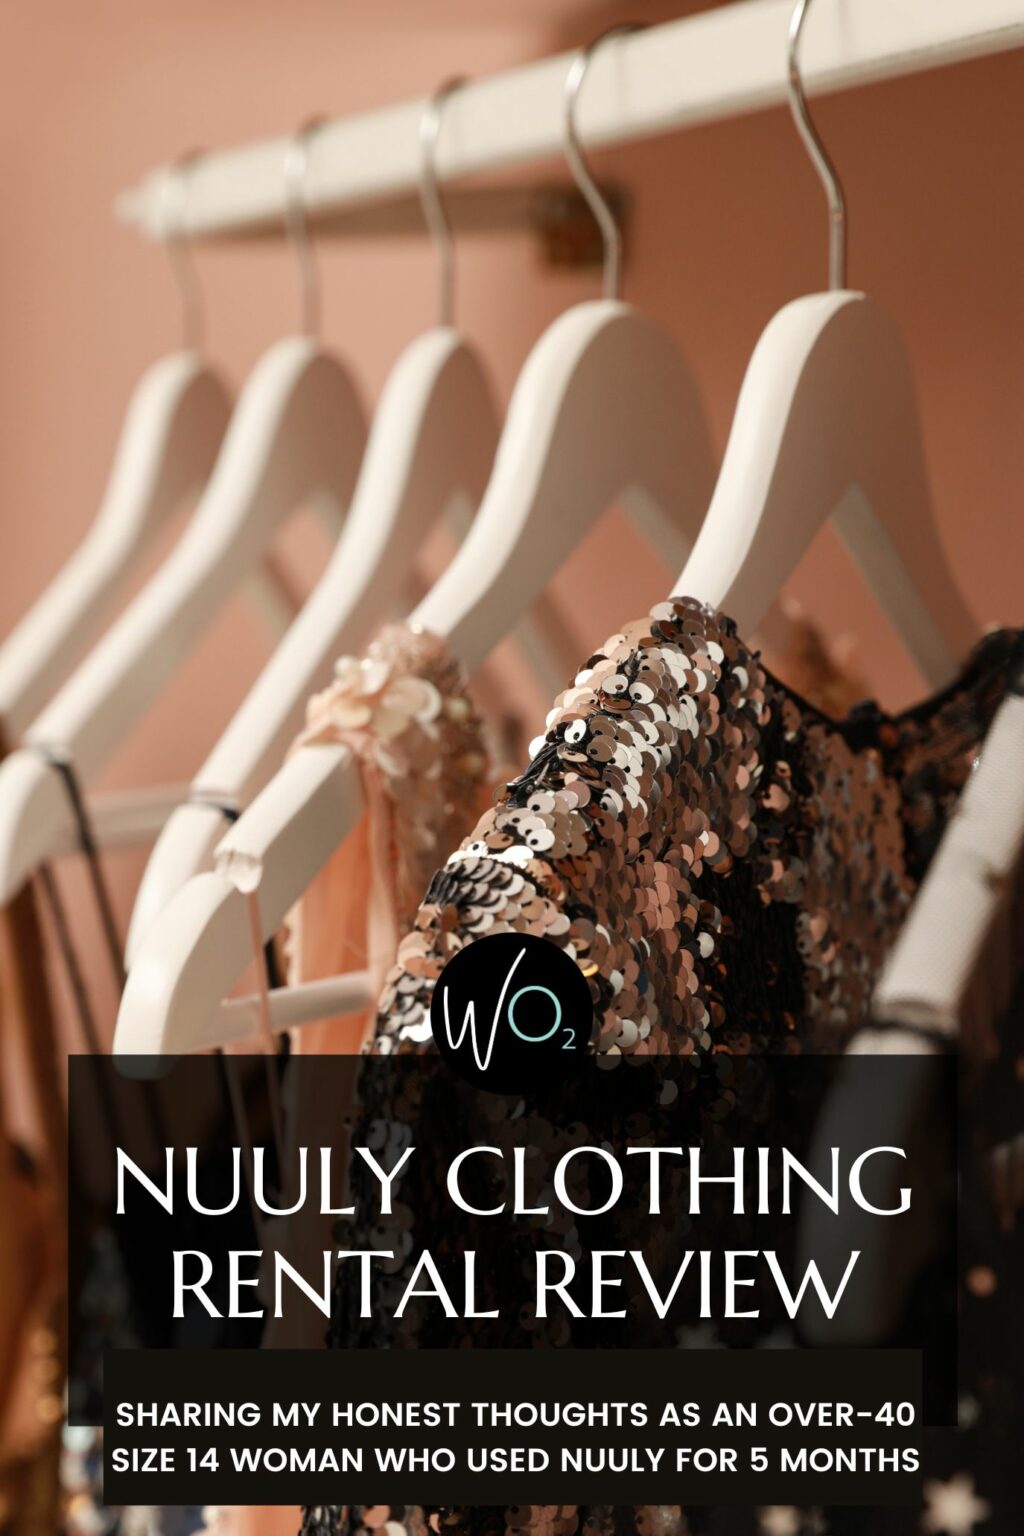 Nuuly Clothing Rental Review by an Over-4o Cusp-sized Woman